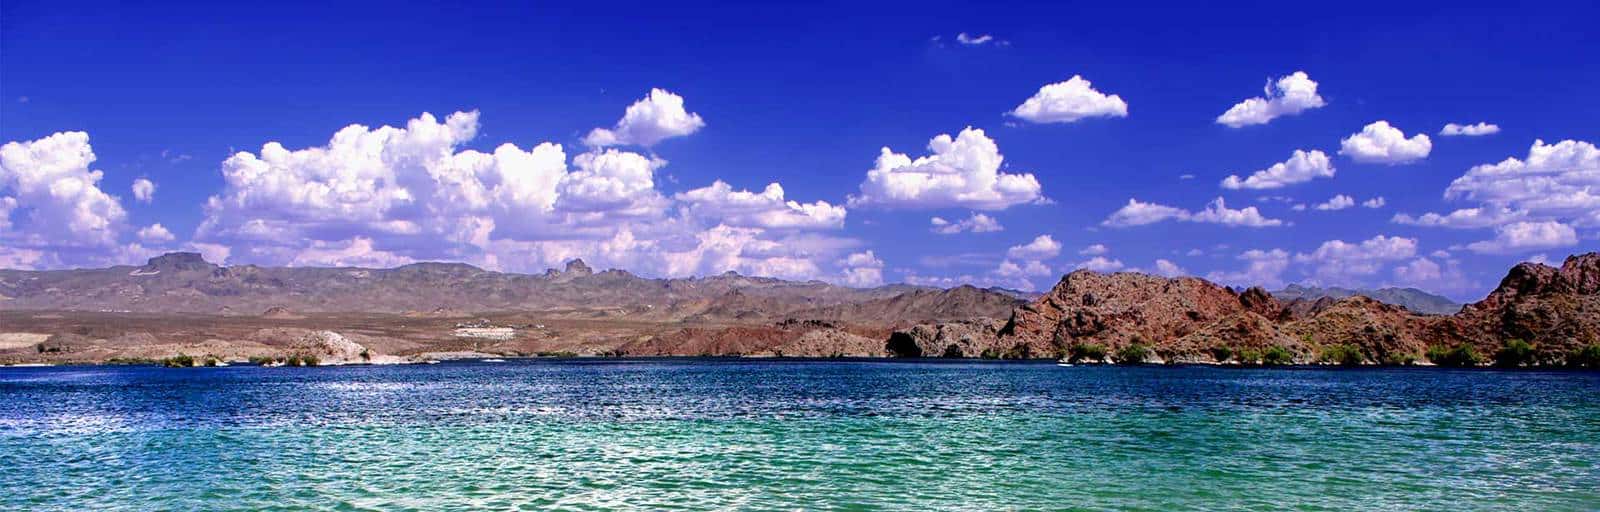 Lake Mohave | Water and mountains